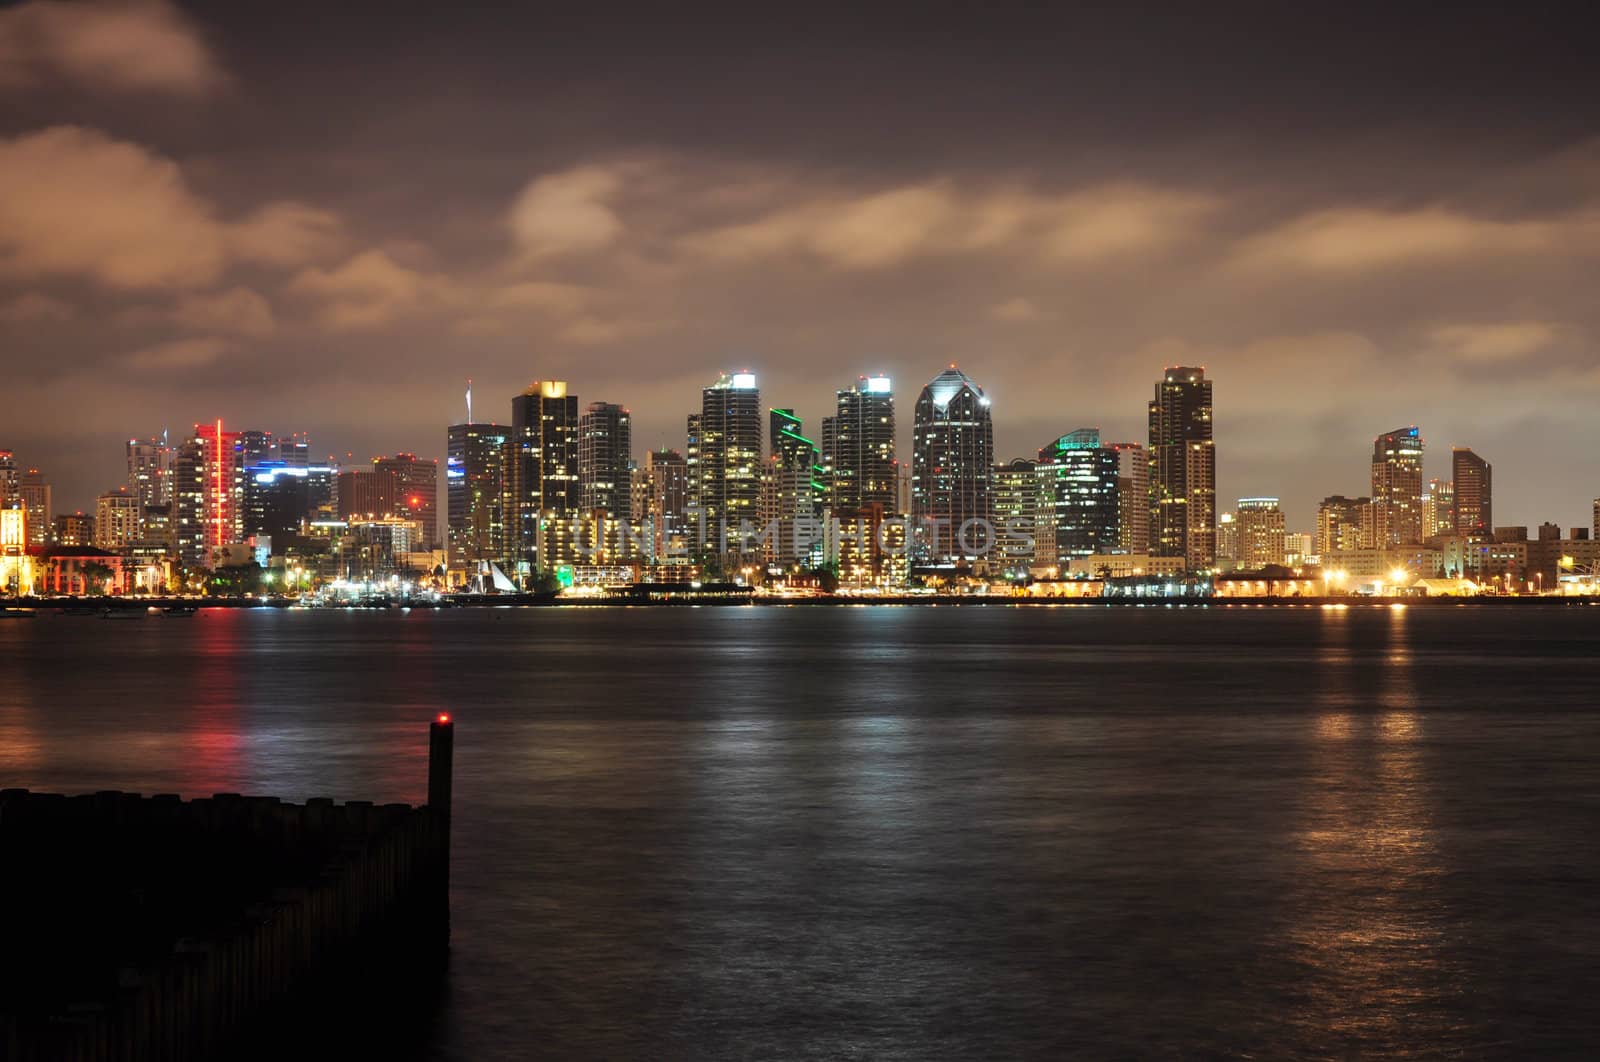 The downtown buildings light up as evening falls in San Diego, California.